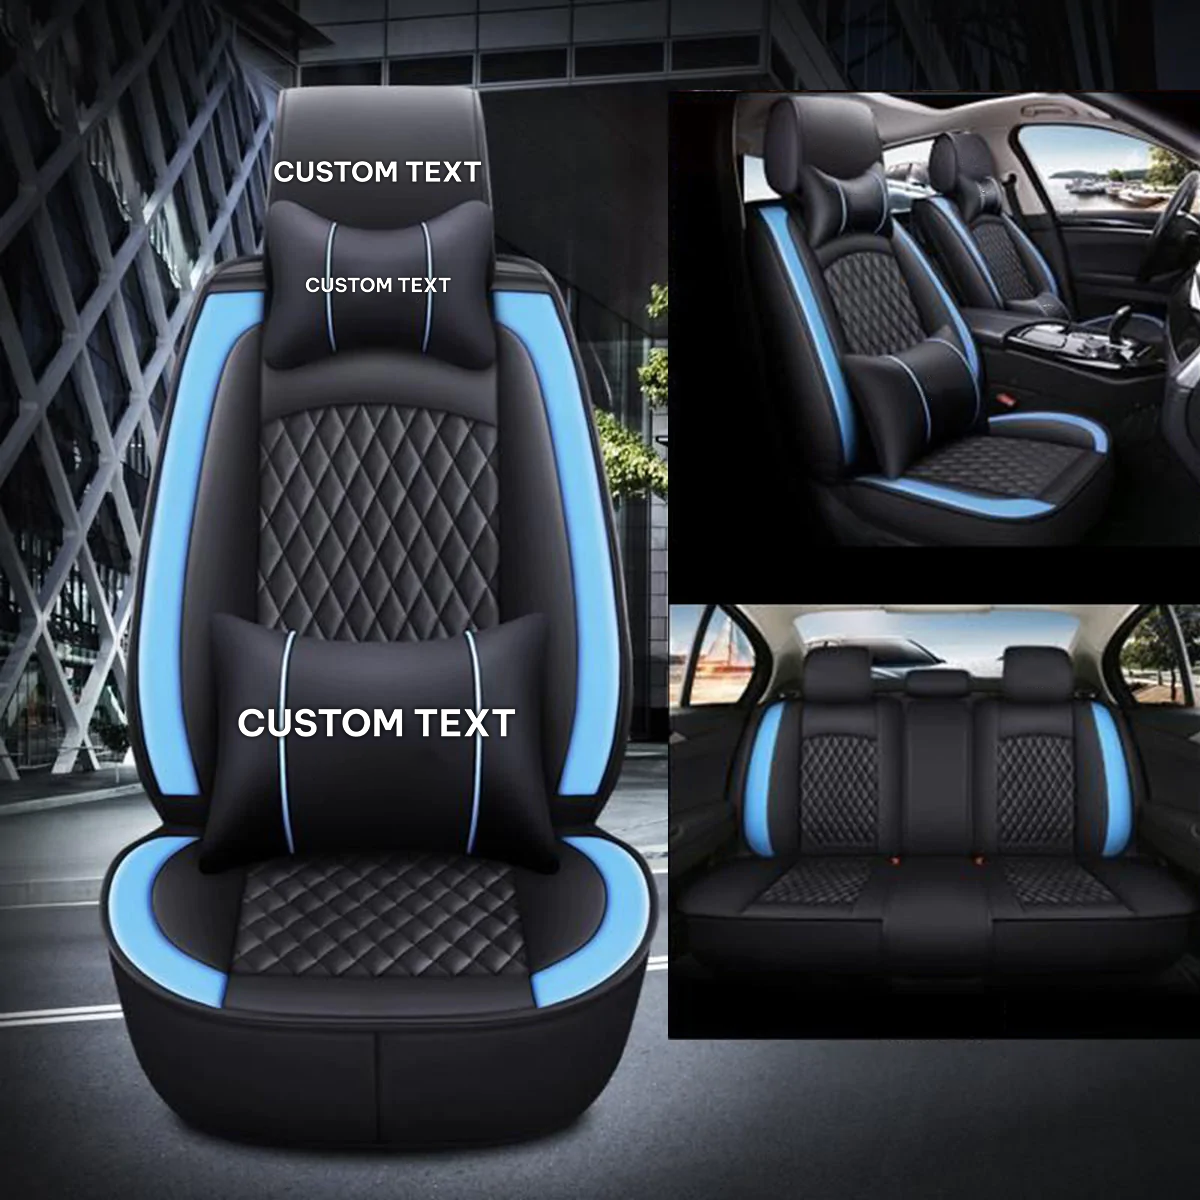 Custom Text For Seat Covers 5 Seats Full Set, Custom Fit For Your Cars, Leatherette Automotive Seat Cushion Protector Universal Fit, Vehicle Auto Interior Decor TS13988